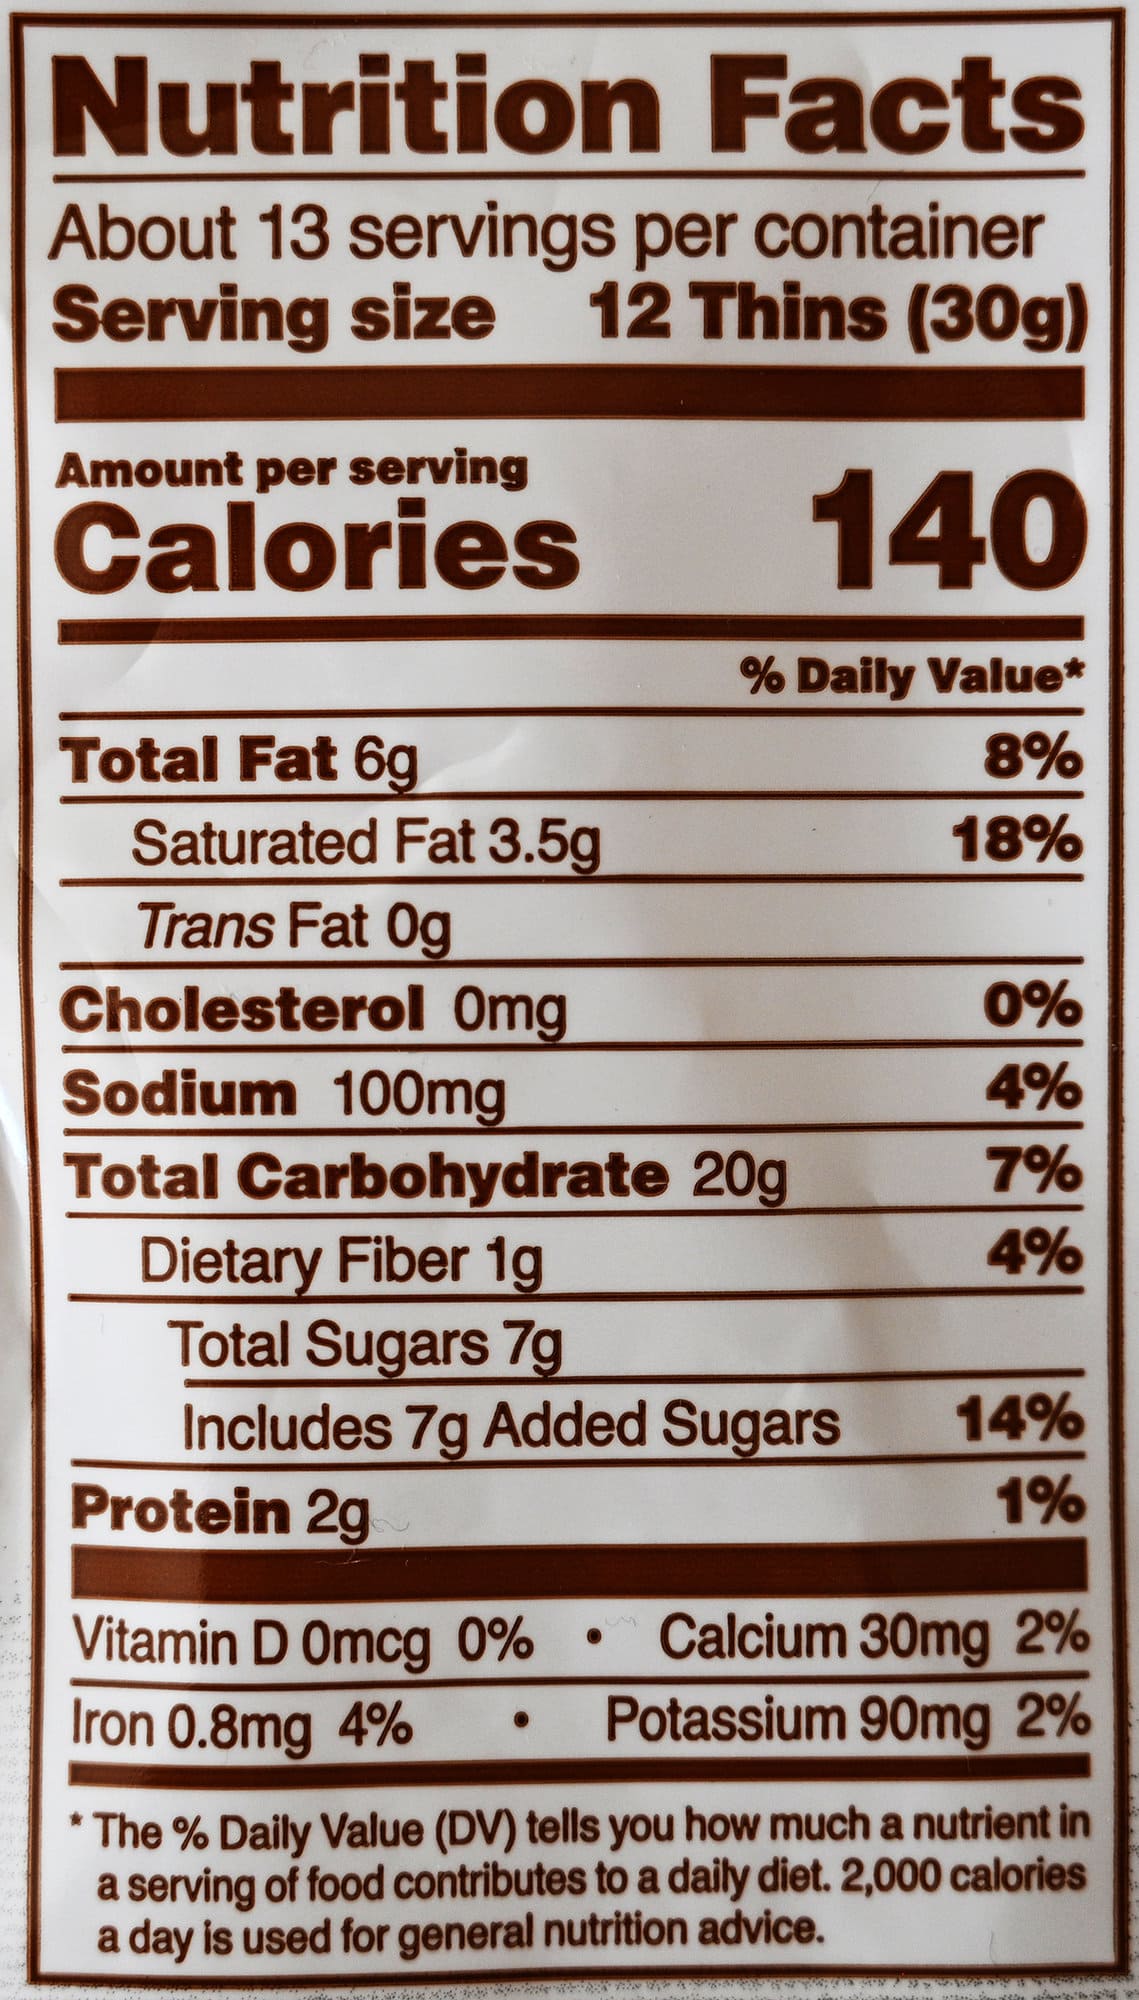 Image of the Sweet Thins nutrition facts from the back of the bag.